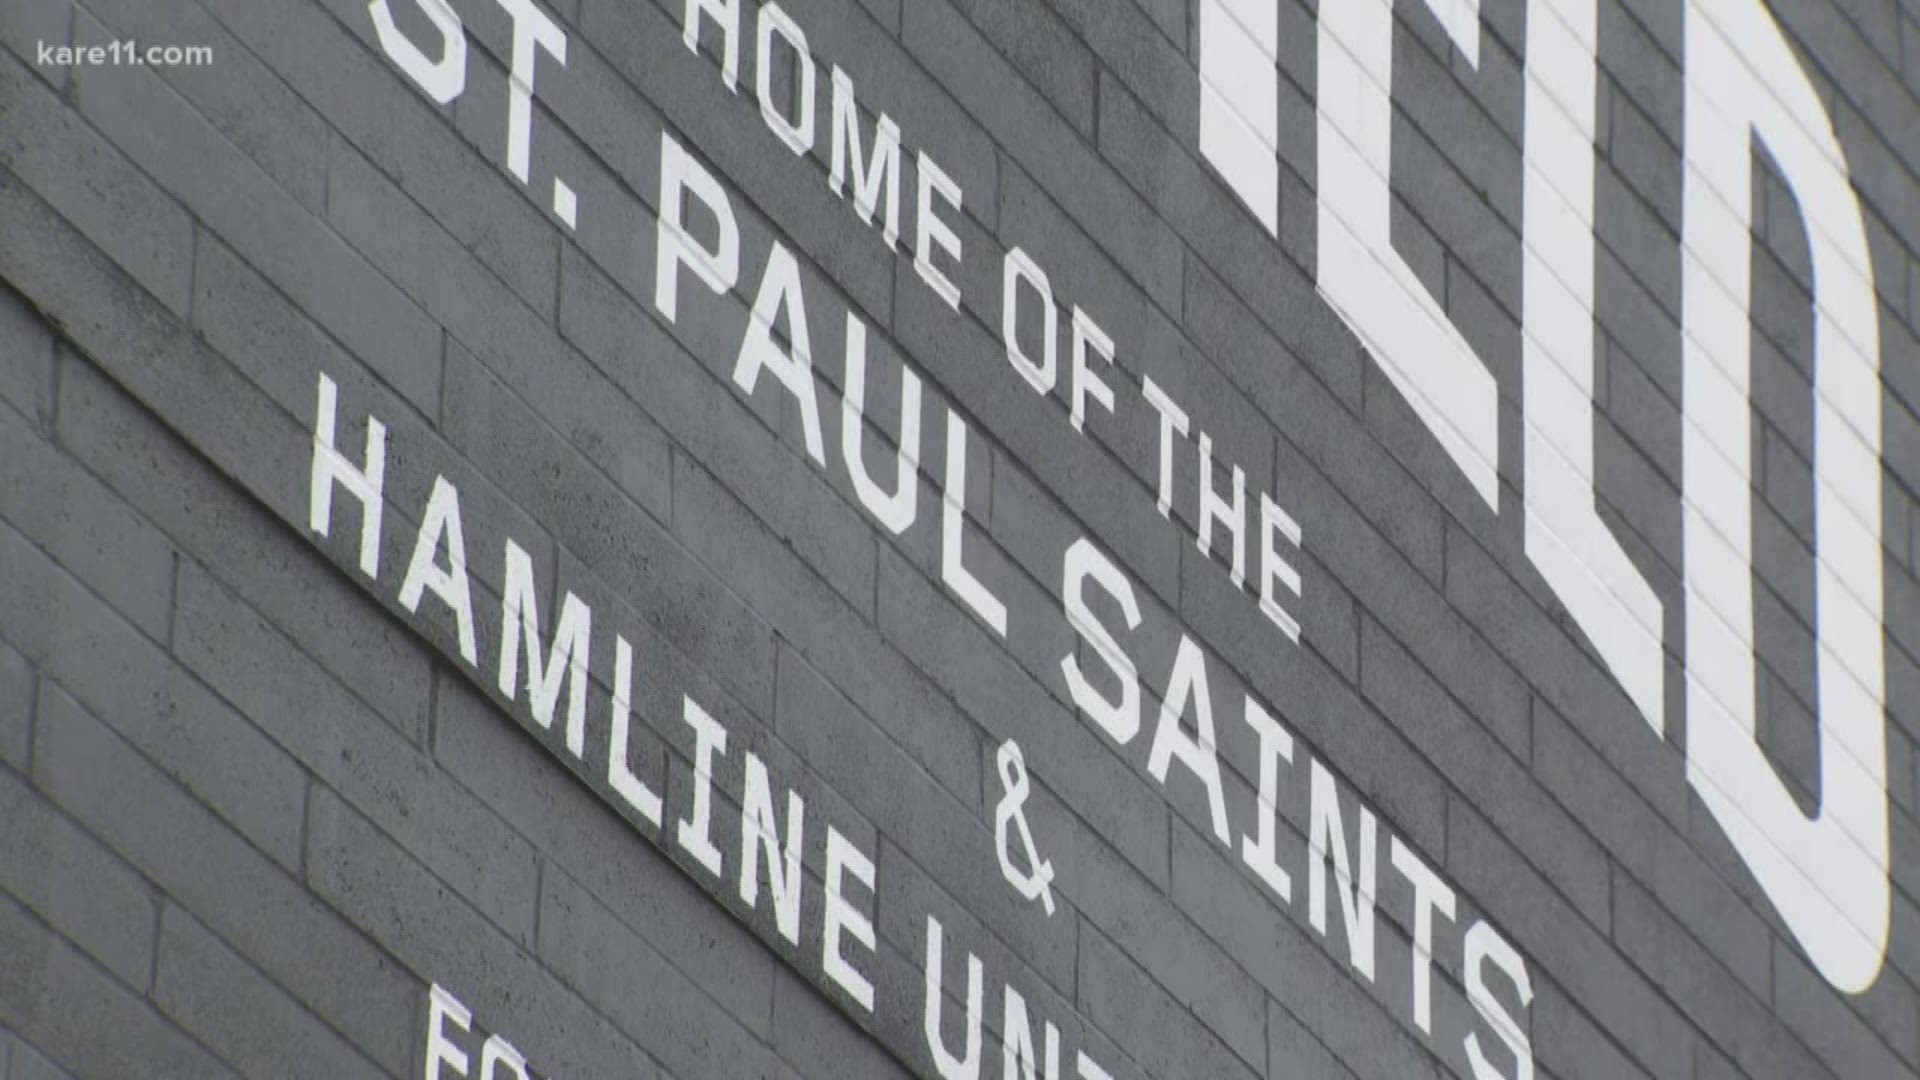 The St. Paul Saints are scheduled to play their season opener on May 19 at CHS Field.